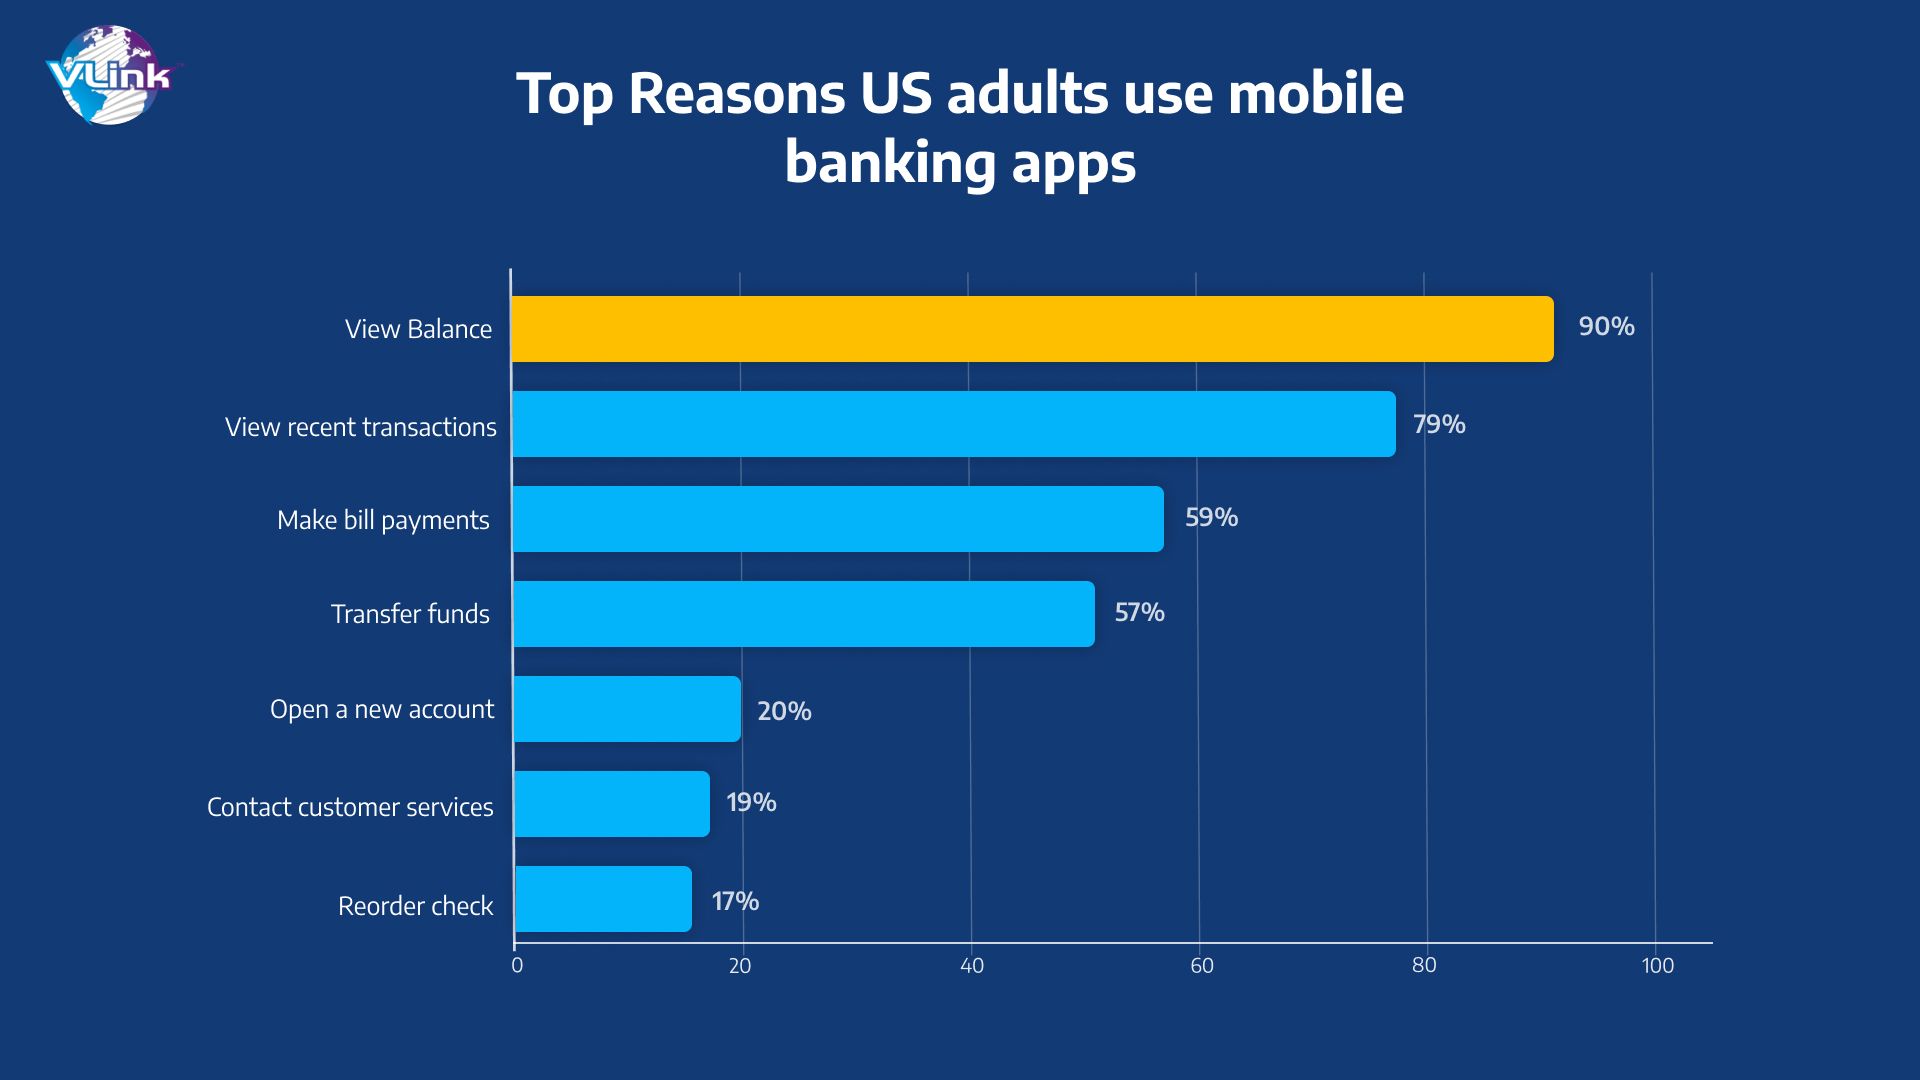 Top Reasons Us adults use mobile banking apps